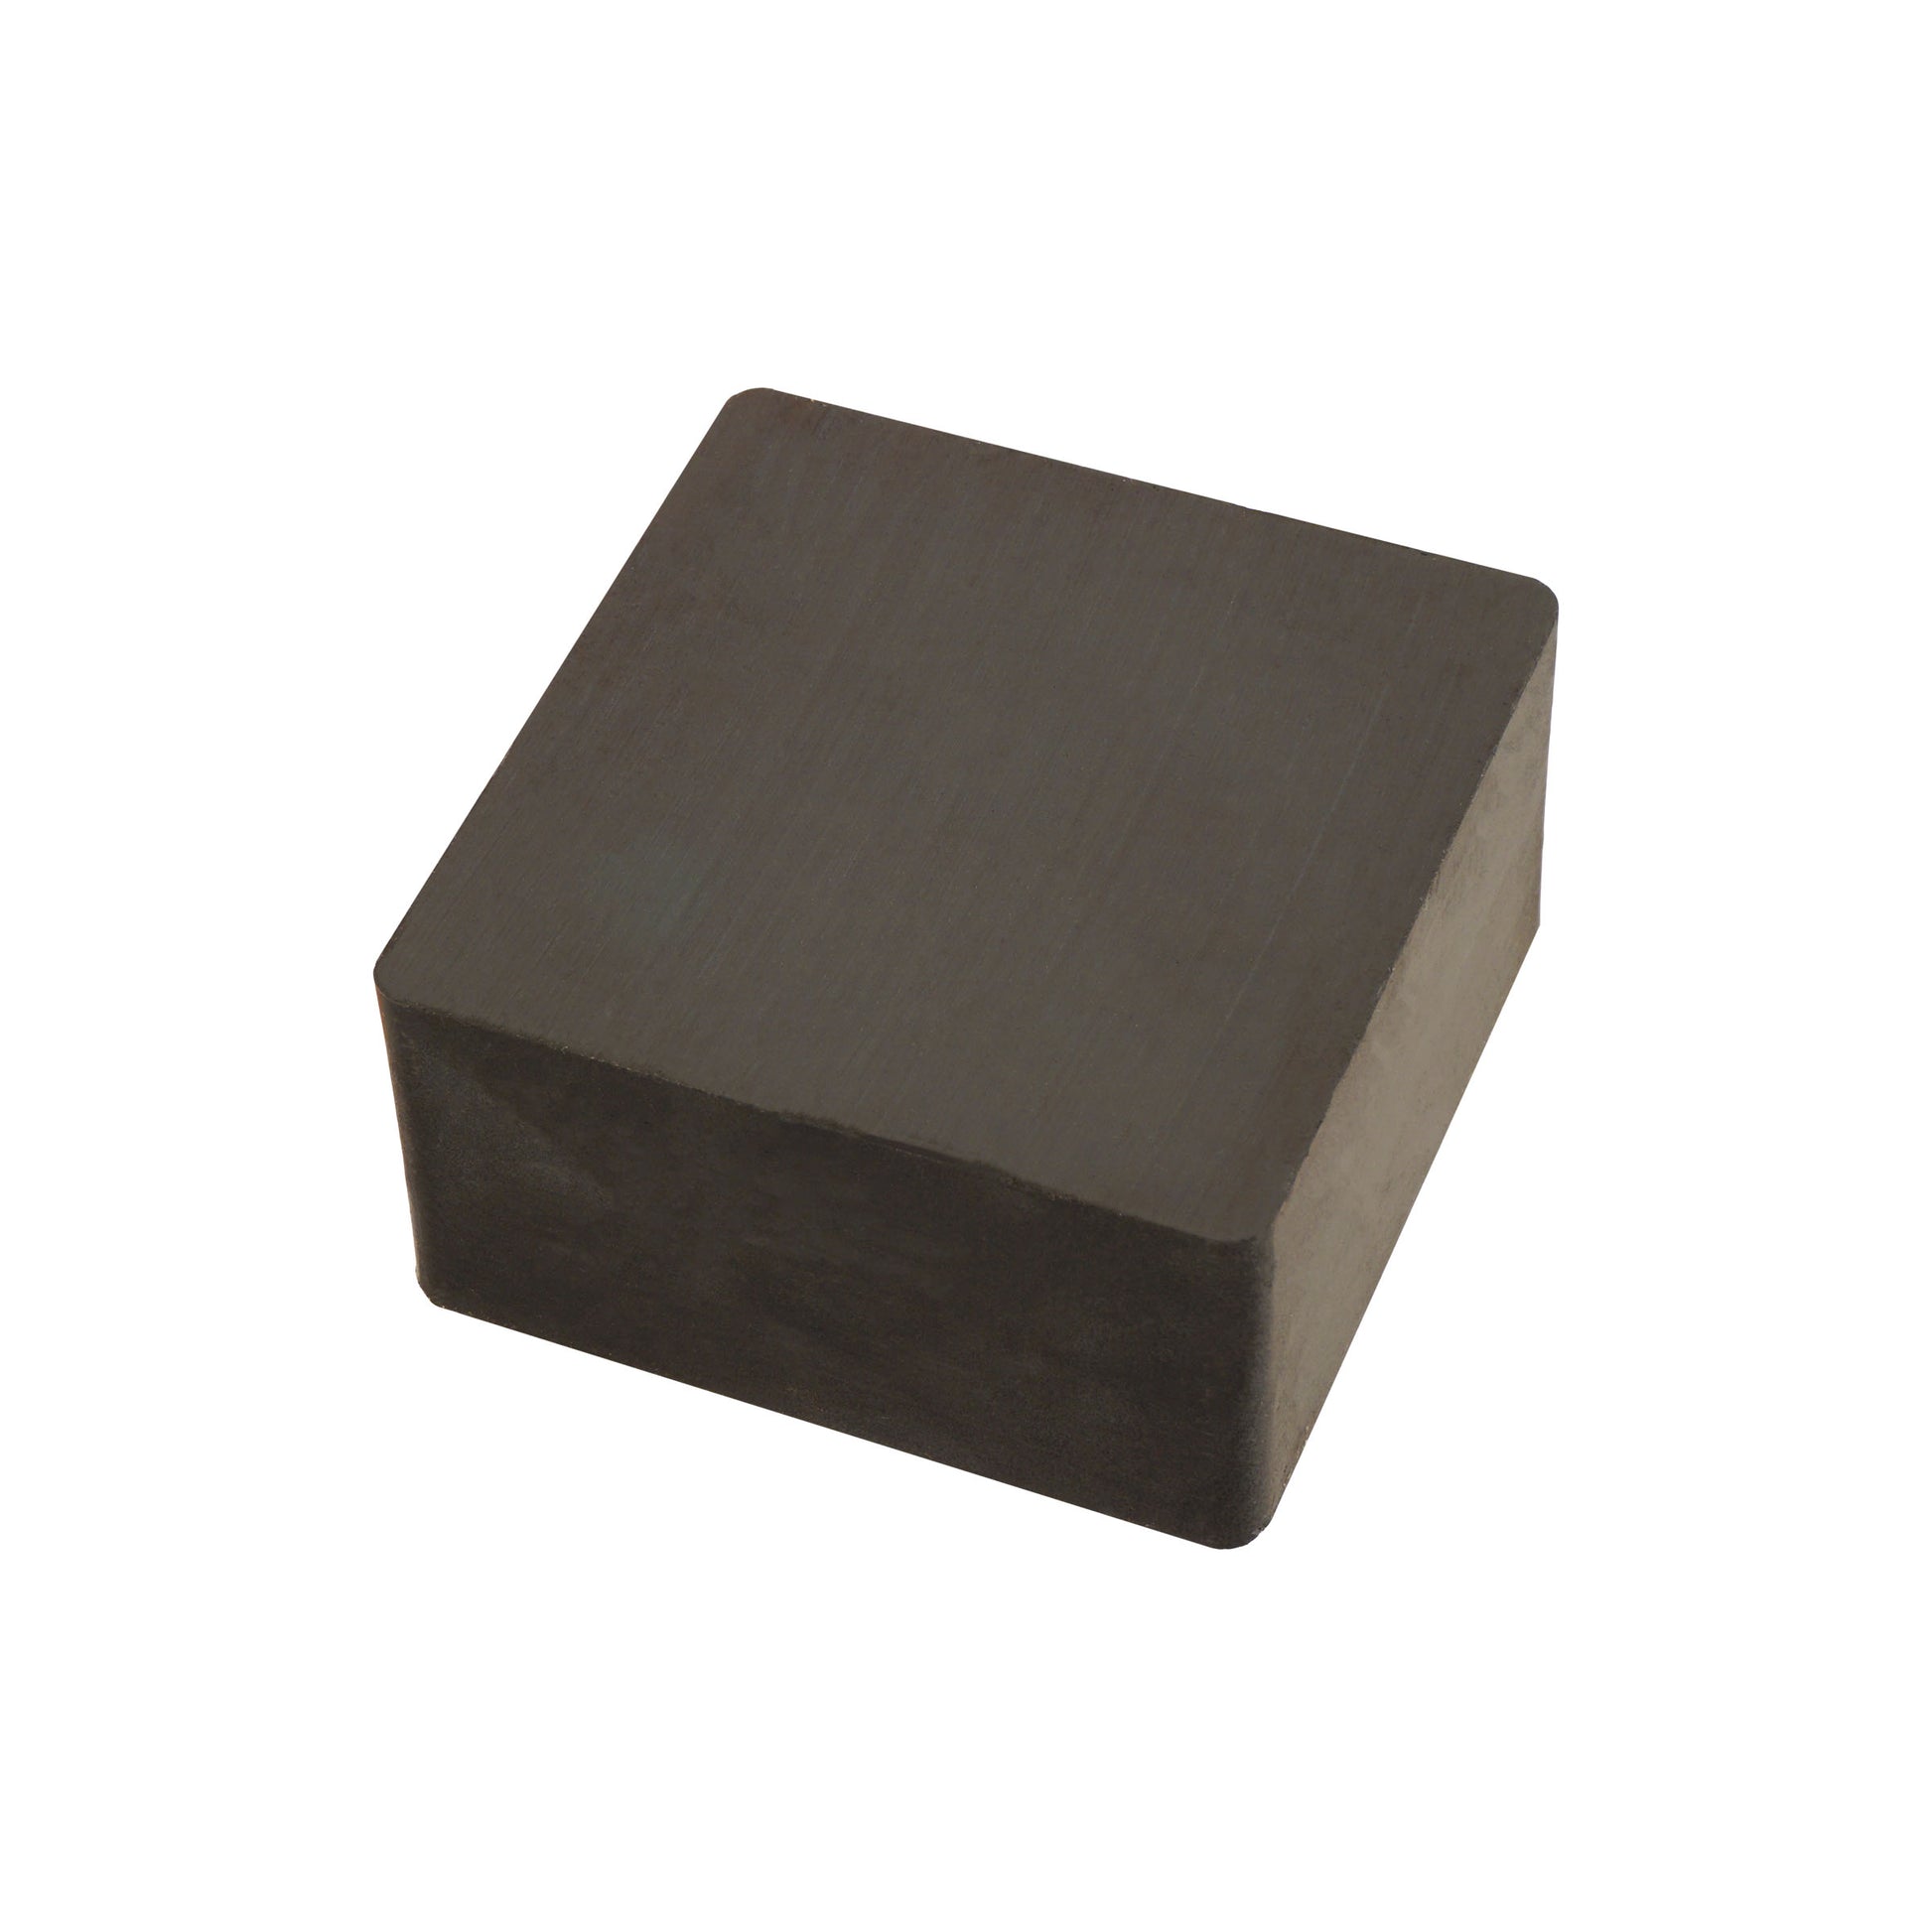 Load image into Gallery viewer, CB1862N Ceramic Block Magnet - 45 Degree Angle View